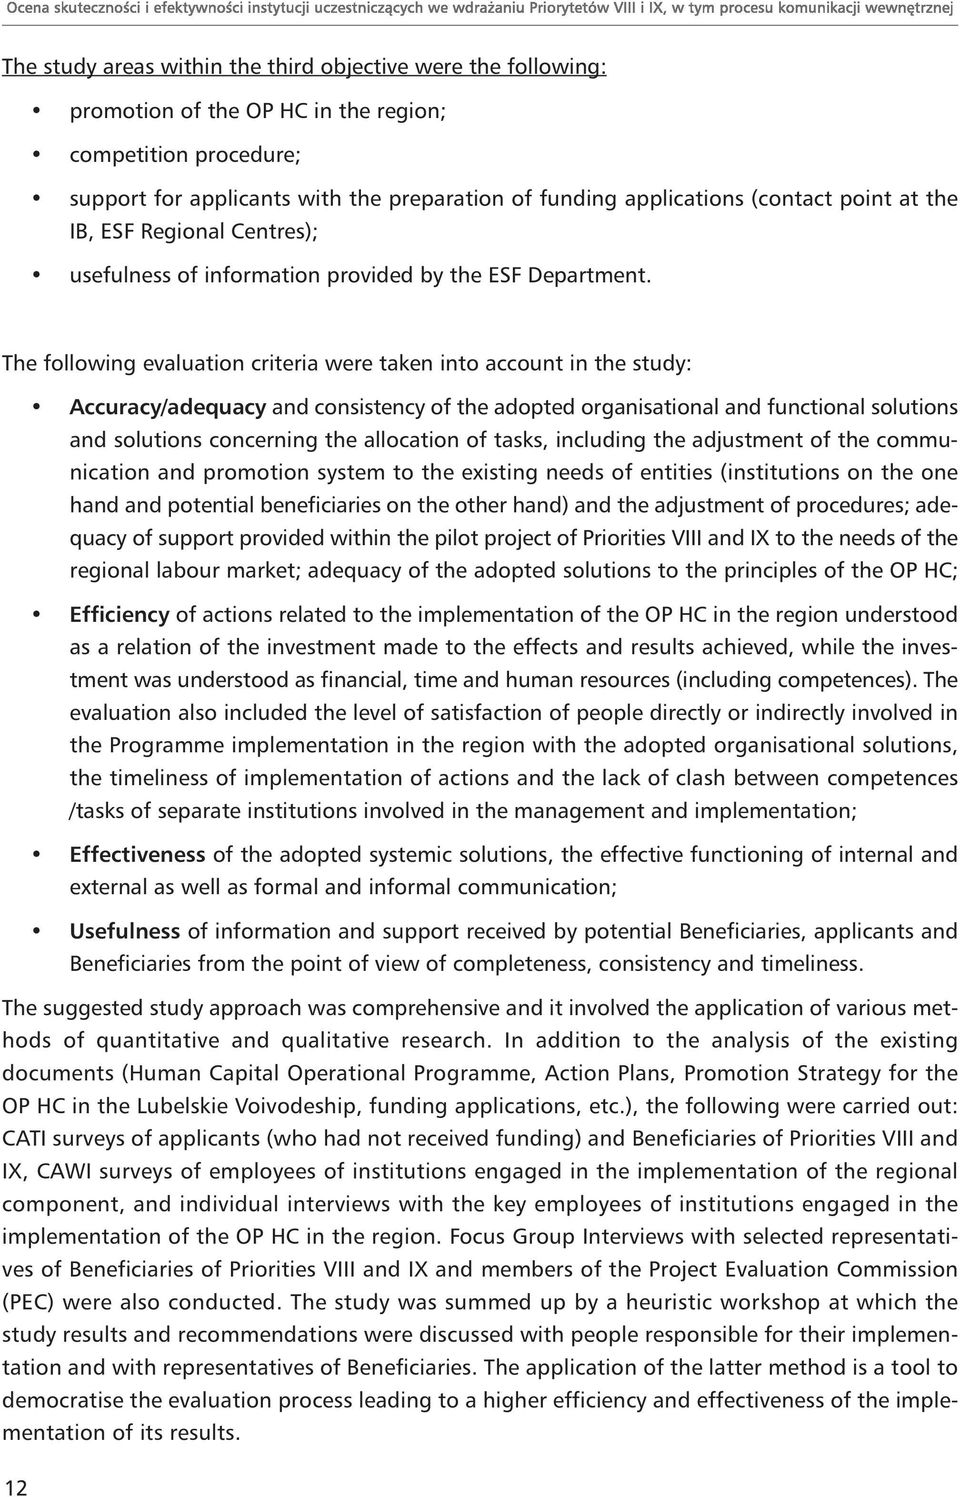 The following evaluation criteria were taken into account in the study: Accuracy/adequacy and consistency of the adopted organisational and functional solutions and solutions concerning the